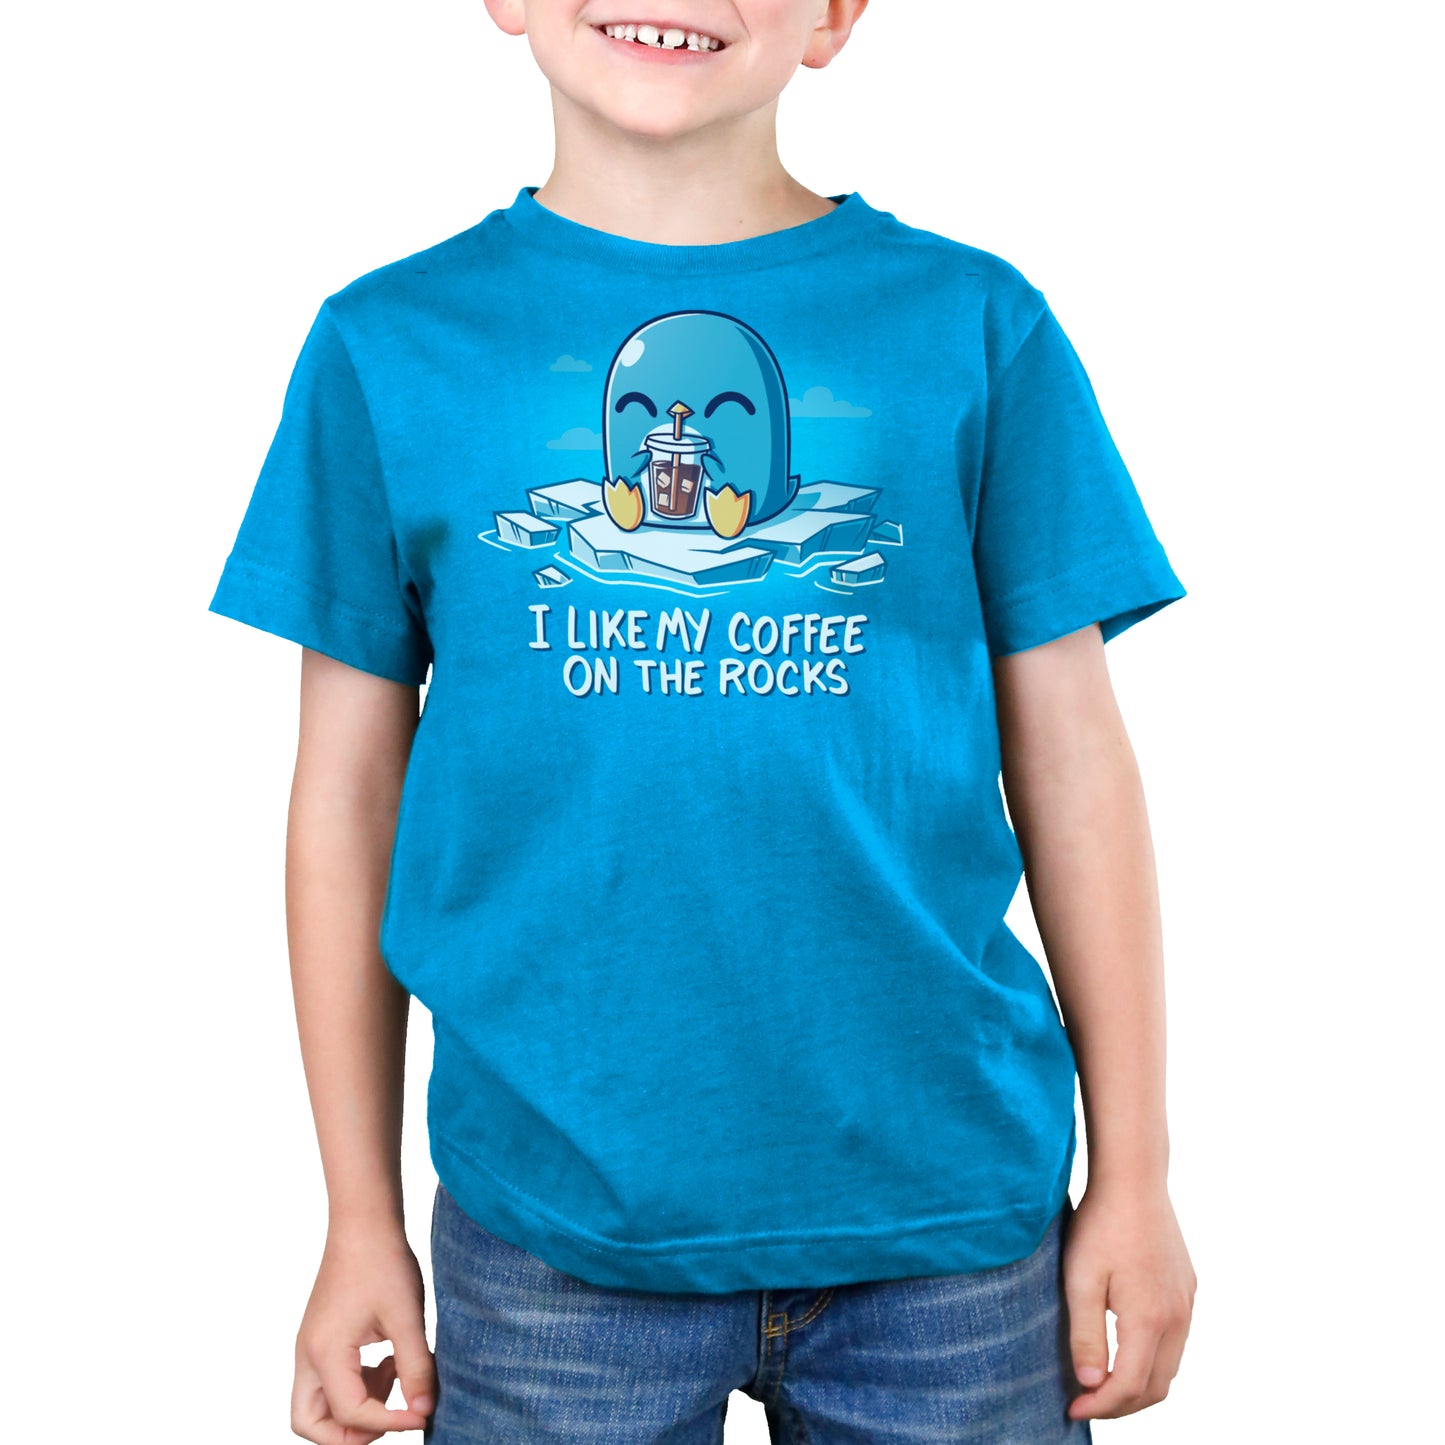 A child wearing a super soft ringspun cotton T-shirt in cobalt blue, adorned with a cartoon penguin sipping iced coffee and the text "I LIKE MY COFFEE ON THE ROCKS" from monsterdigital’s I Like My Coffee on the Rocks collection.